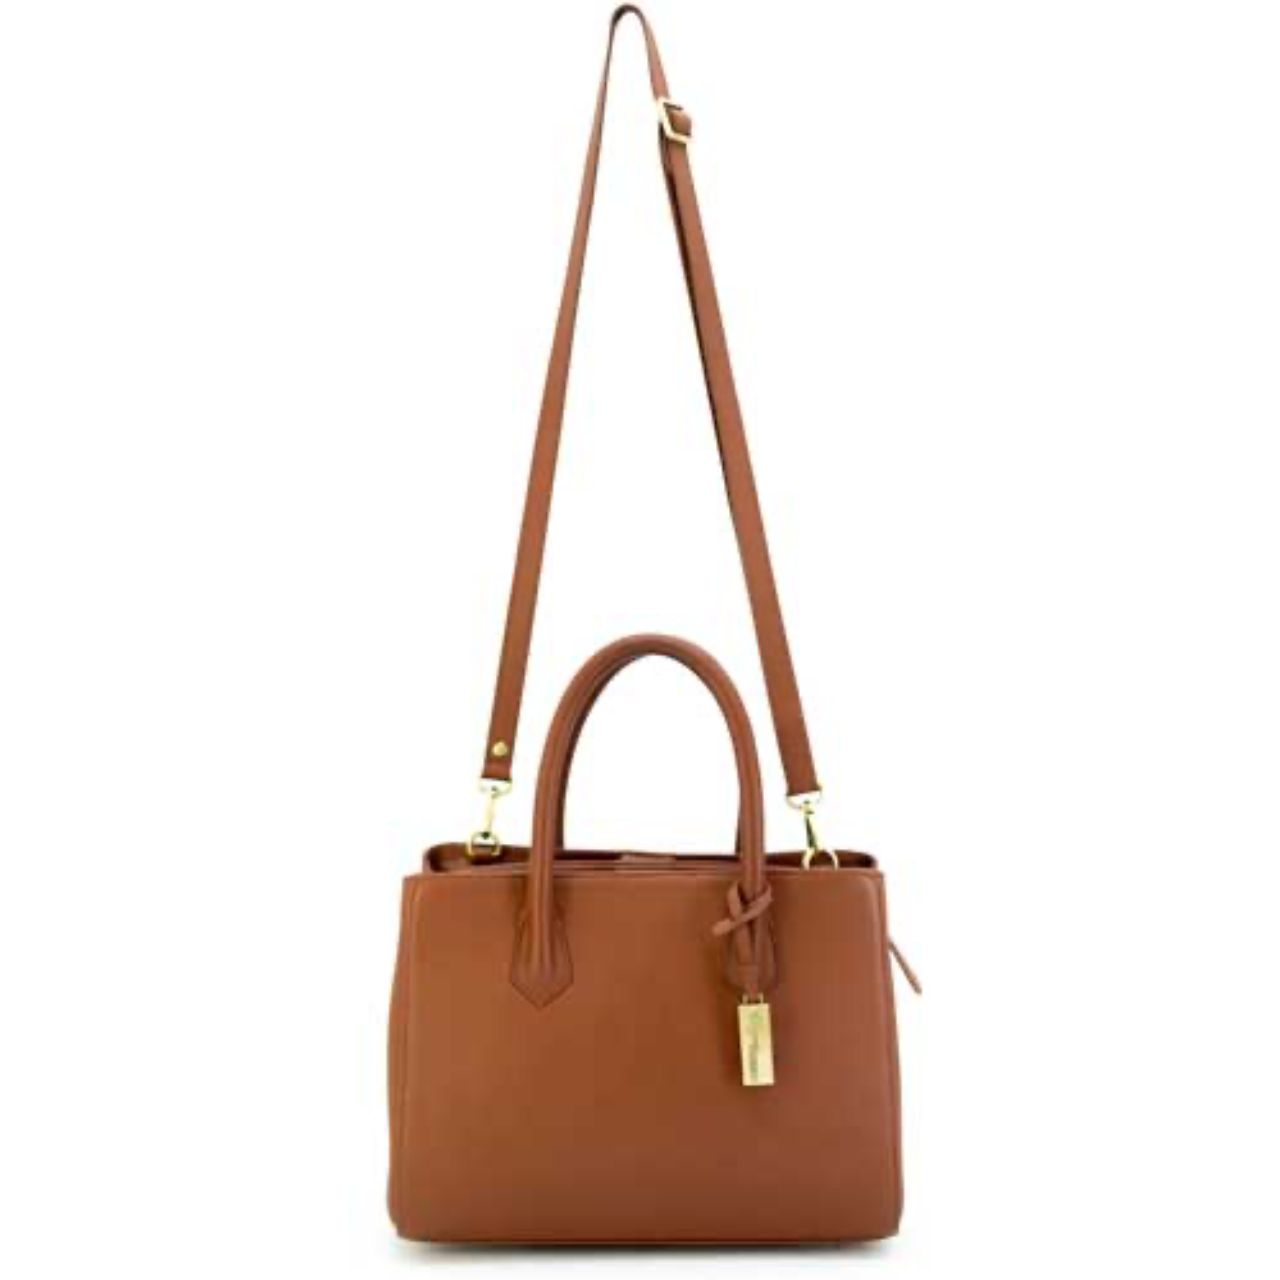 "Natalie" Brown concealed carry purse with strap